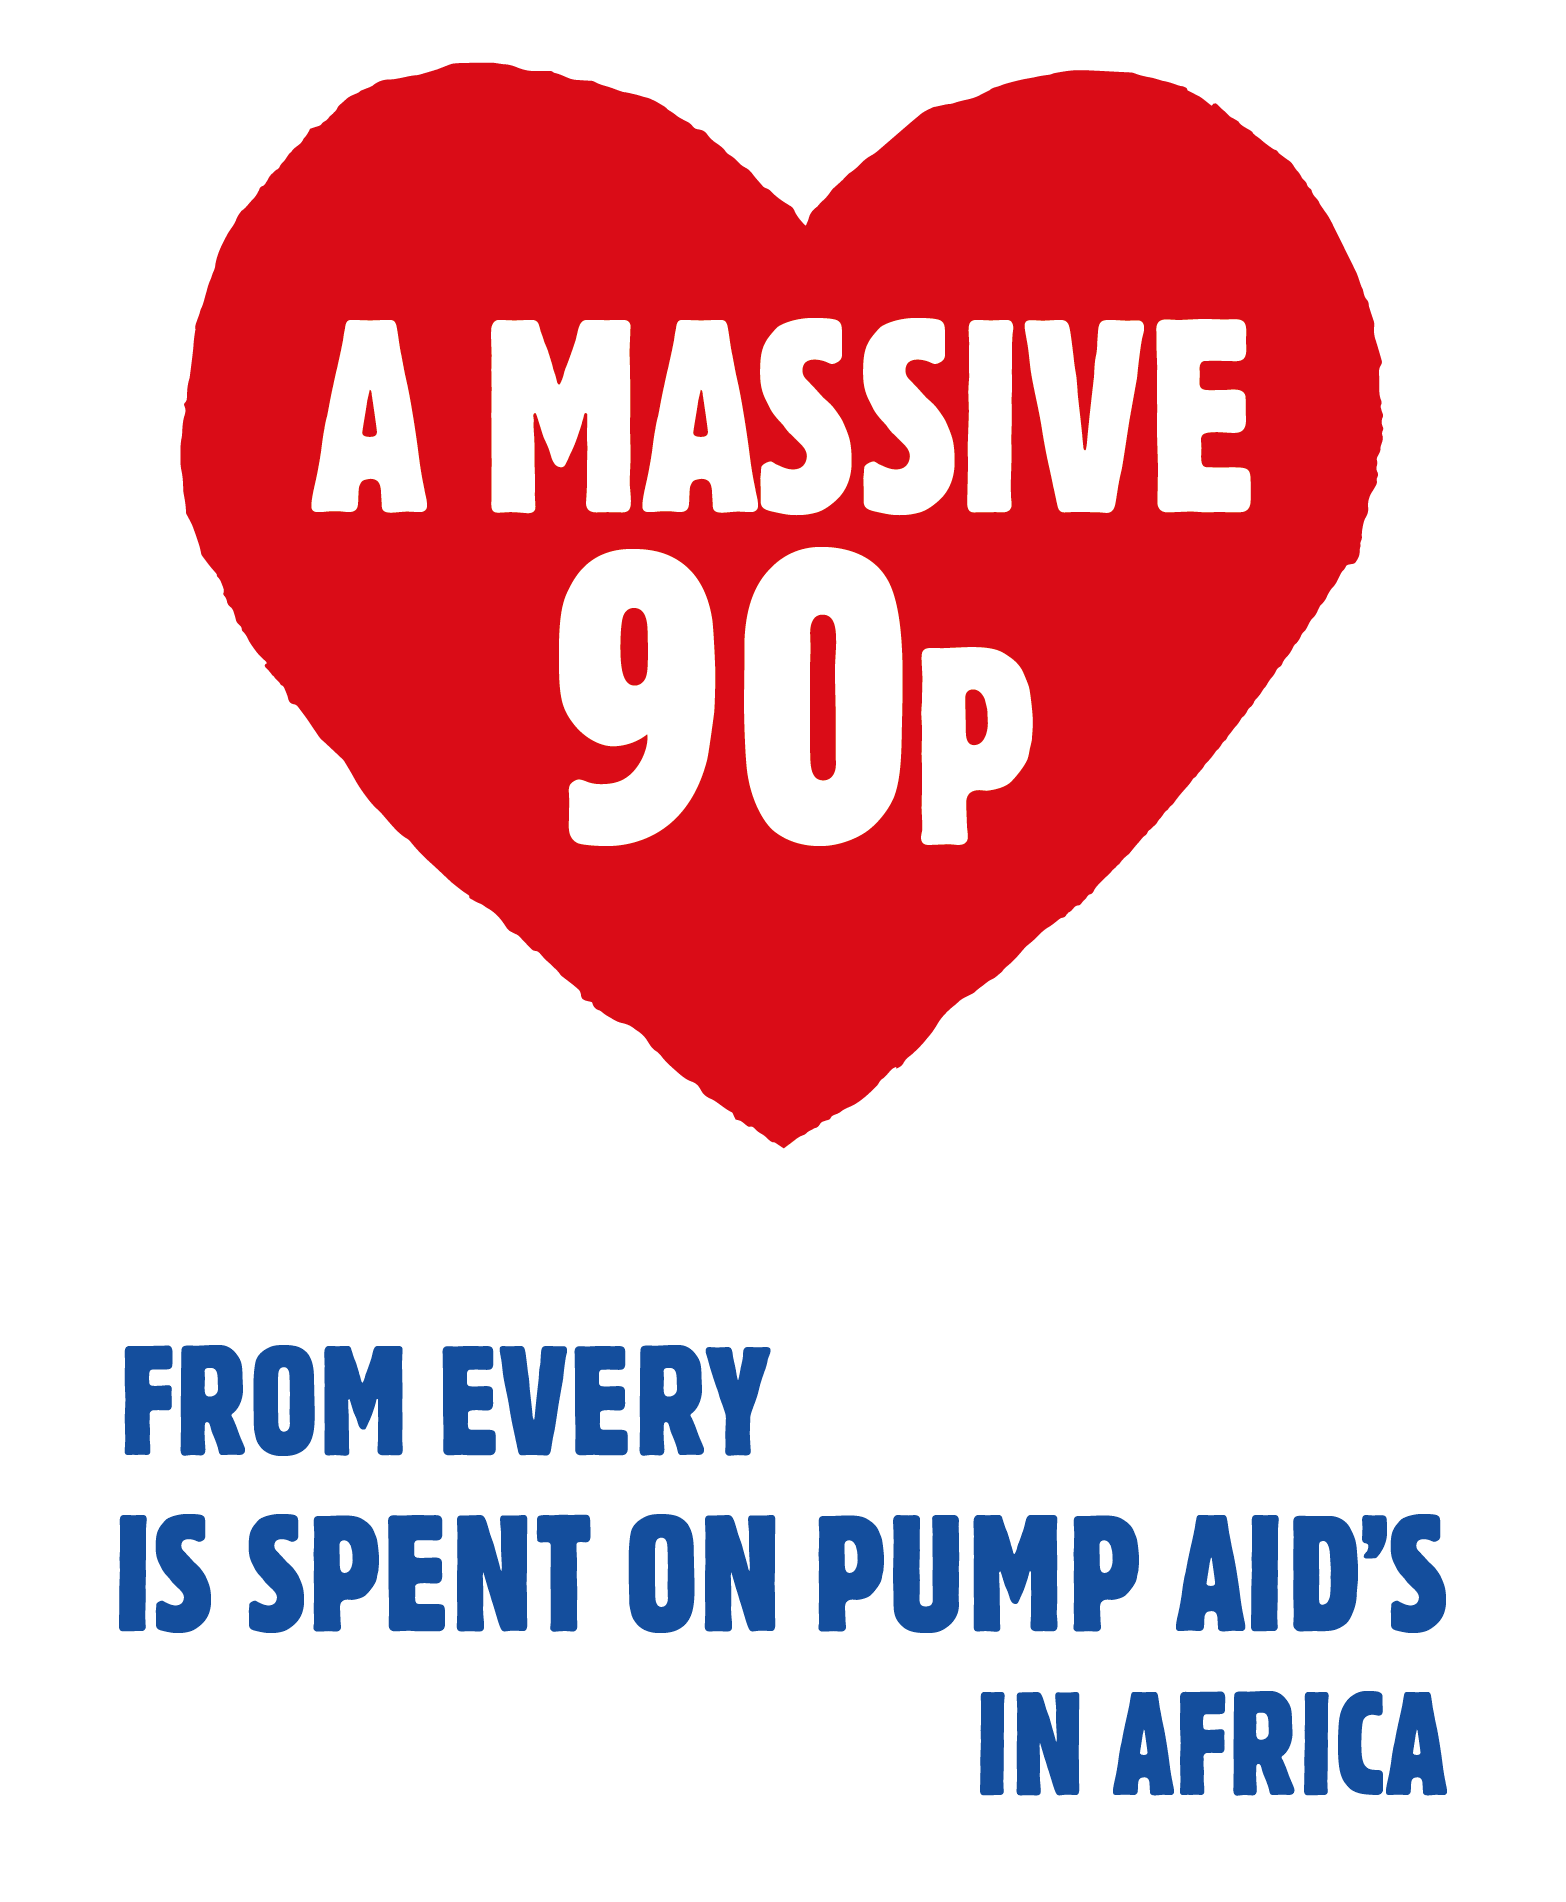 A massive 90p from every £1 donated is spent on Pump Aid's direct delivery in Africa